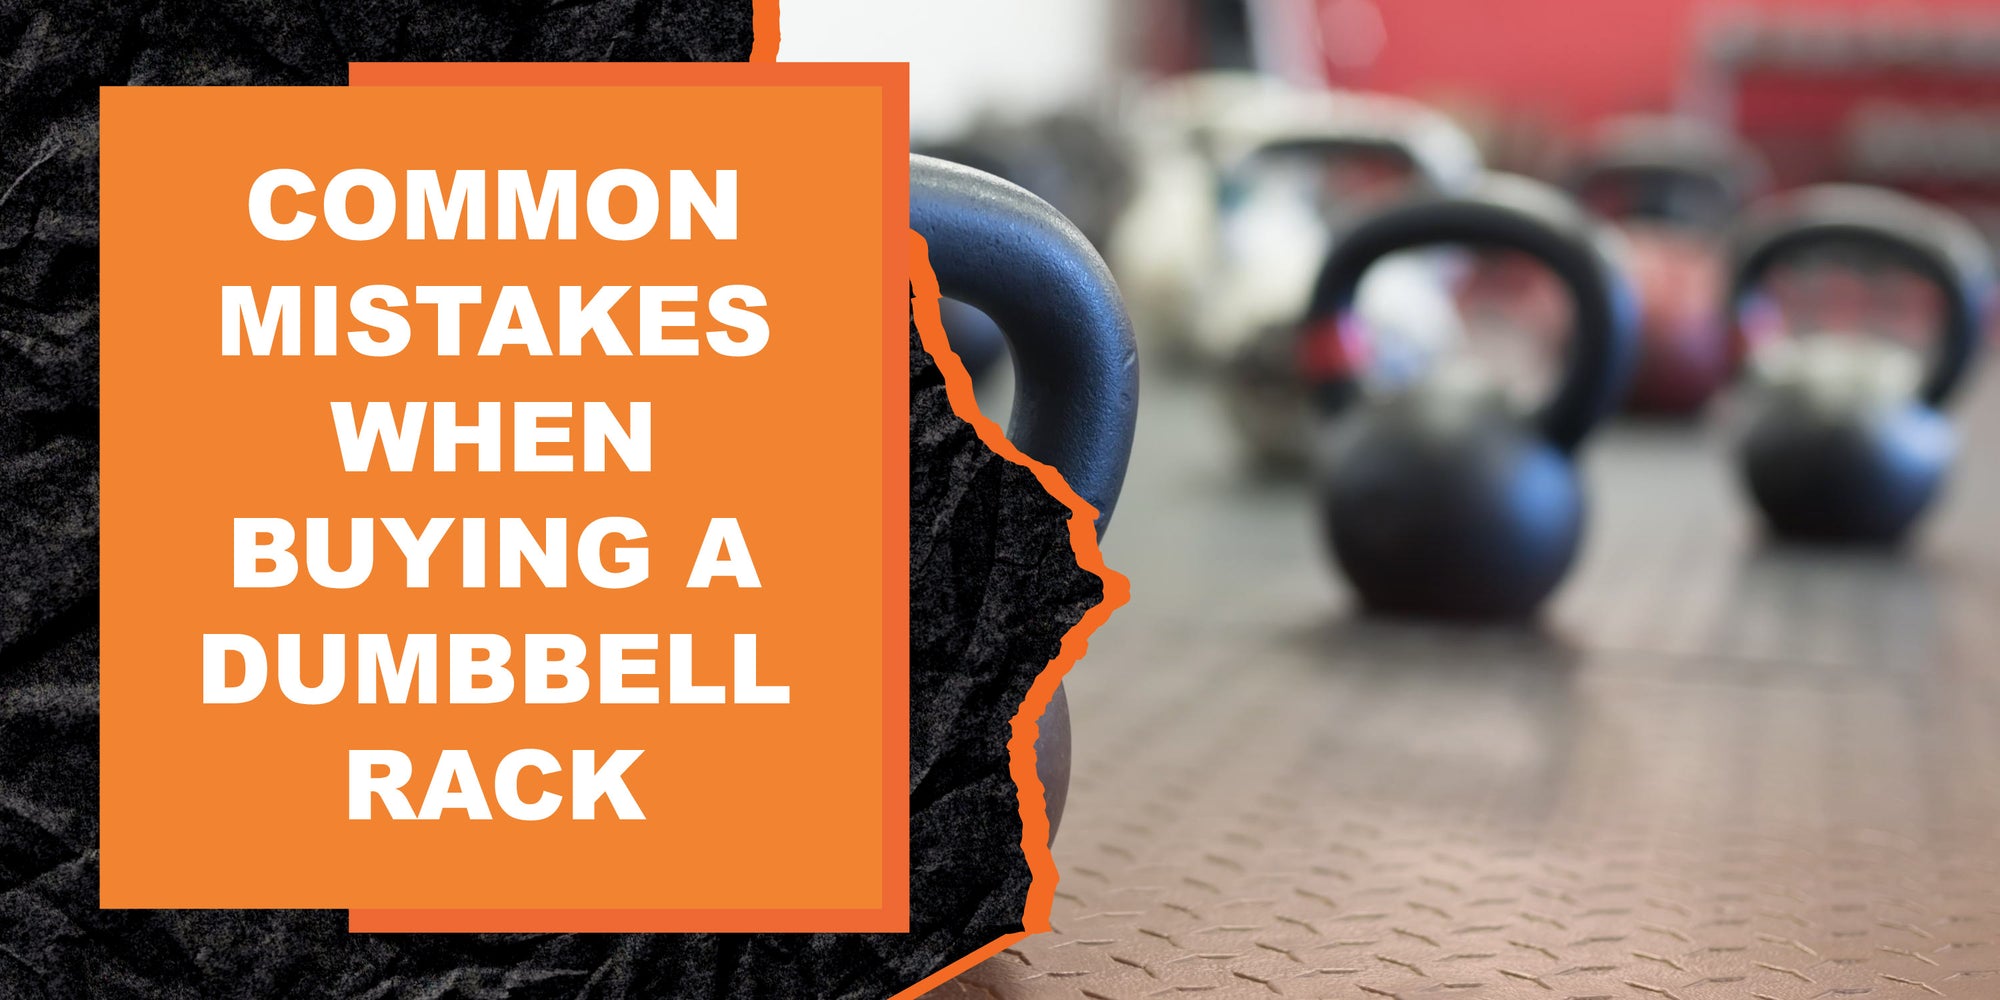 Common Mistakes When Buying a Dumbbell Rack